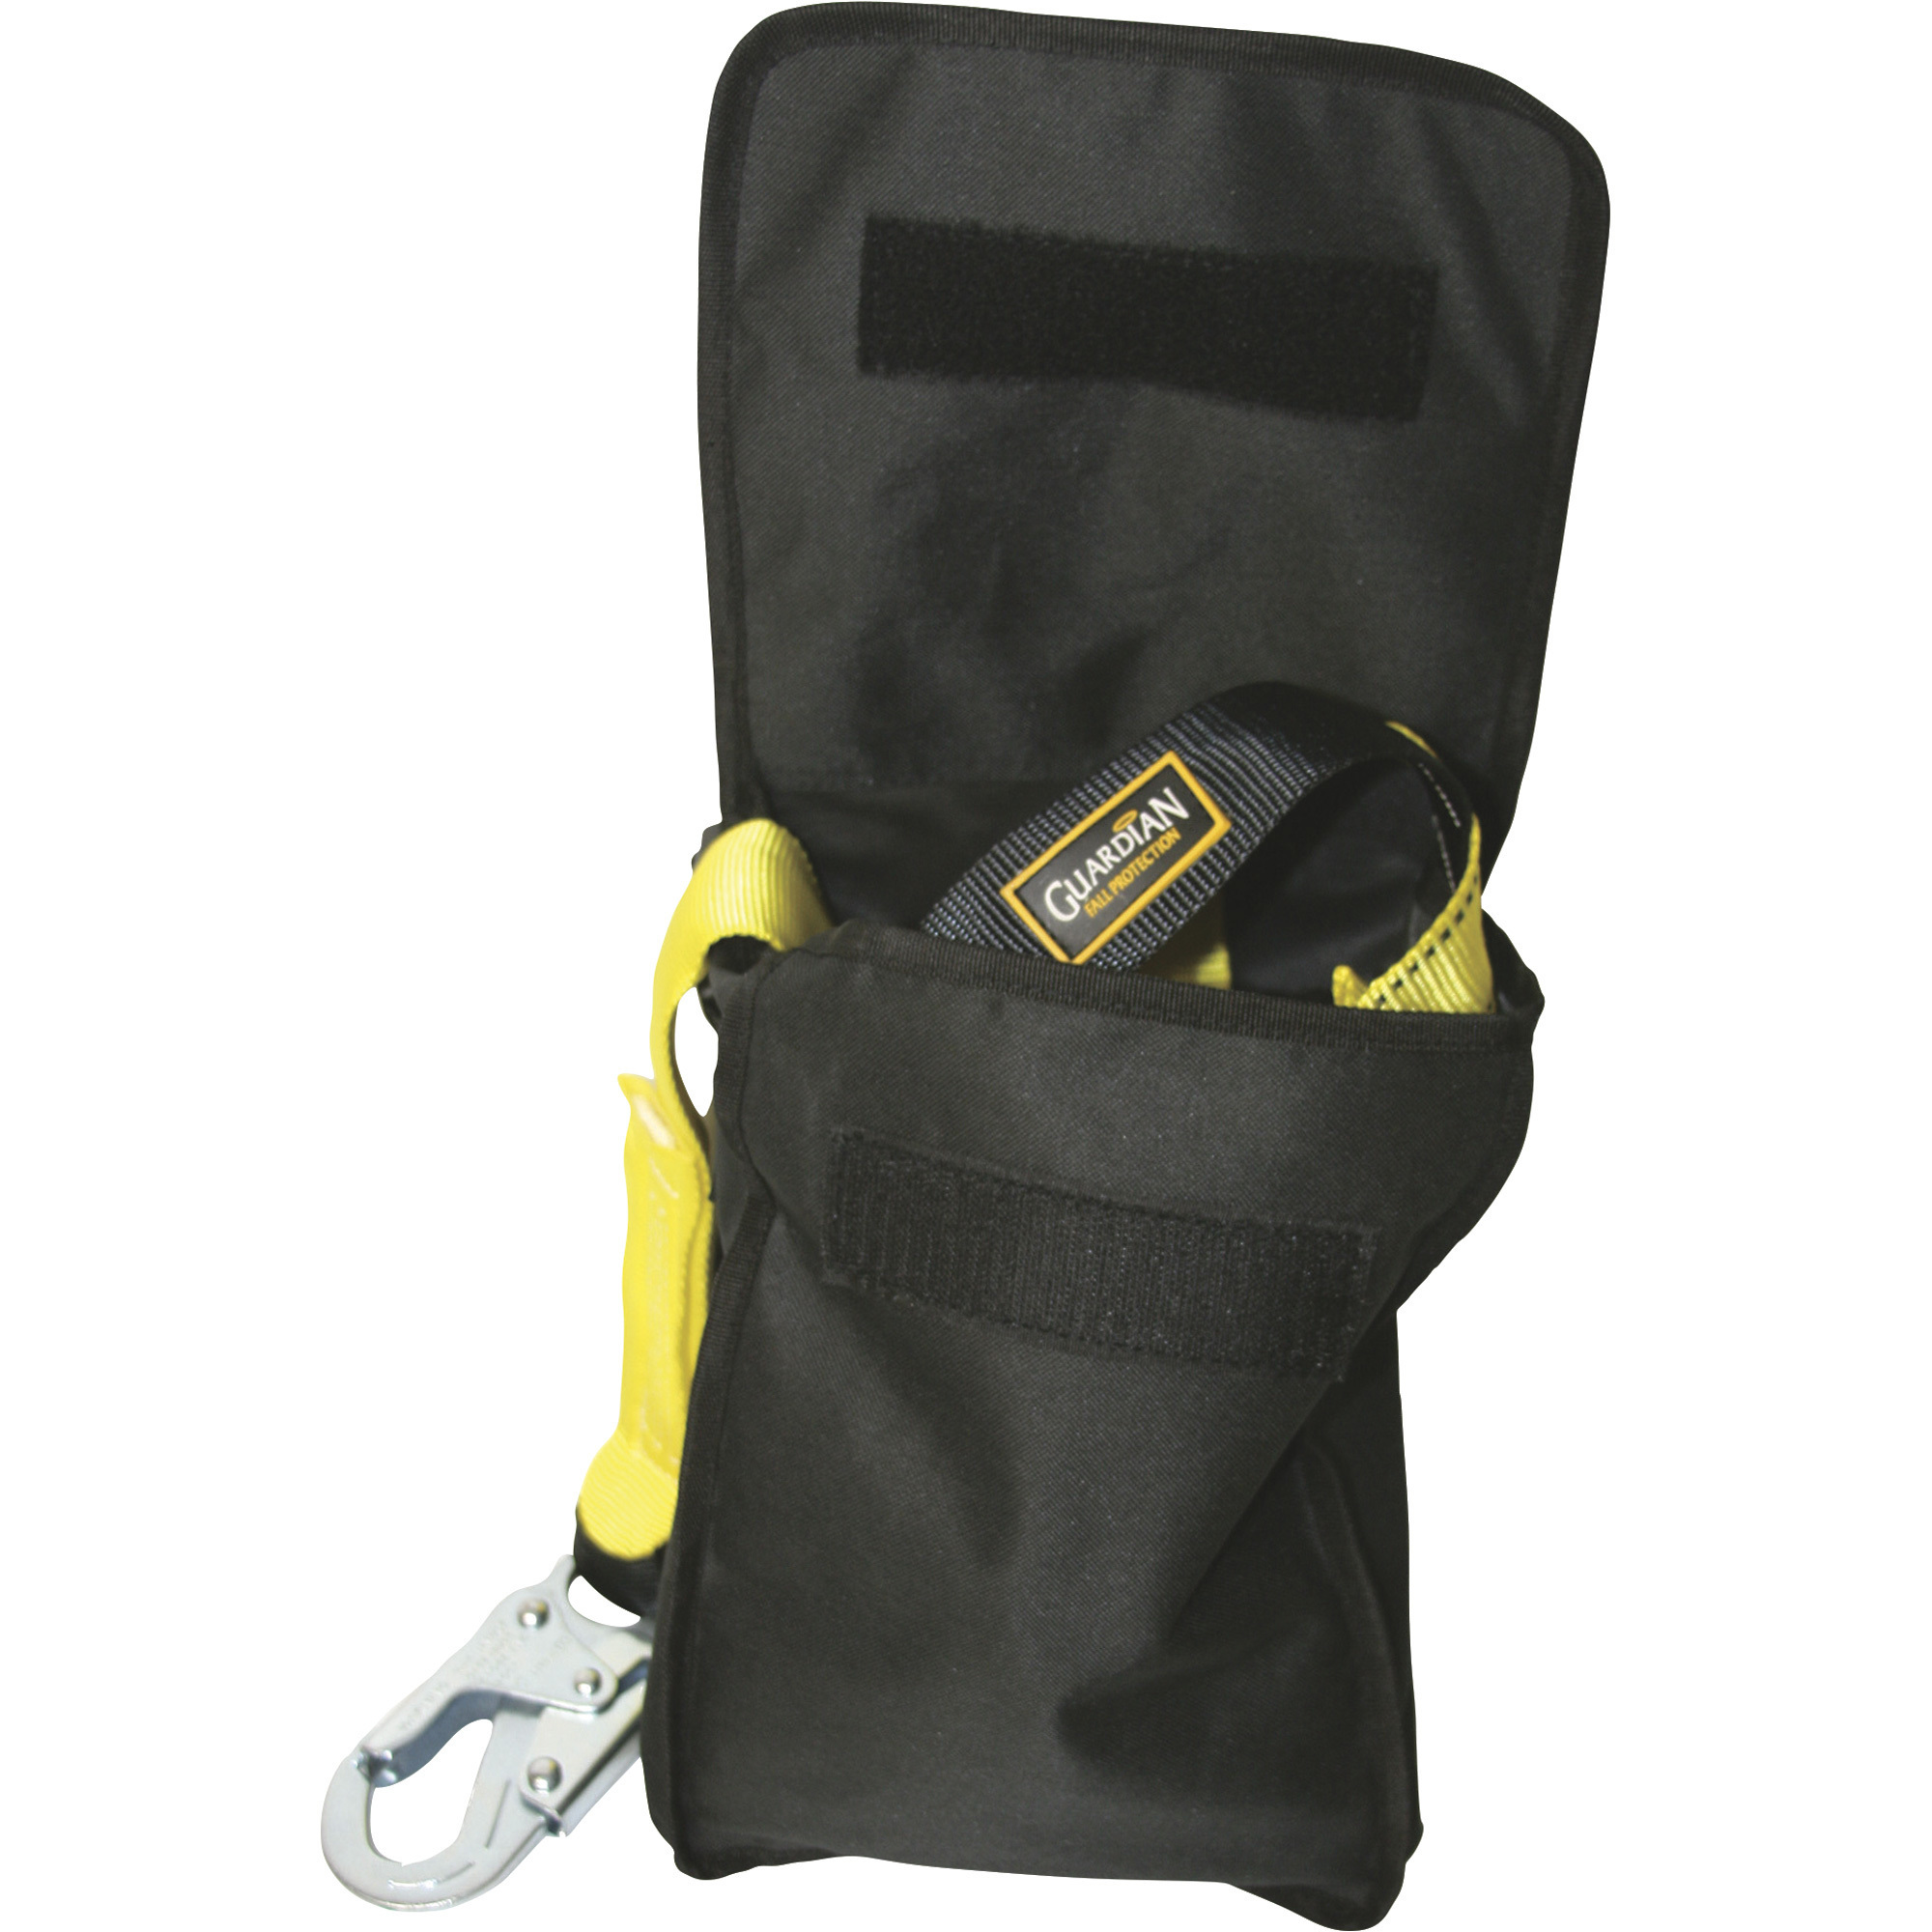 Qualcraft Guardian Fall Protection Contractor Kit, High-Visibility  Yellow/Black, Safety Harness with Shock Lanyard